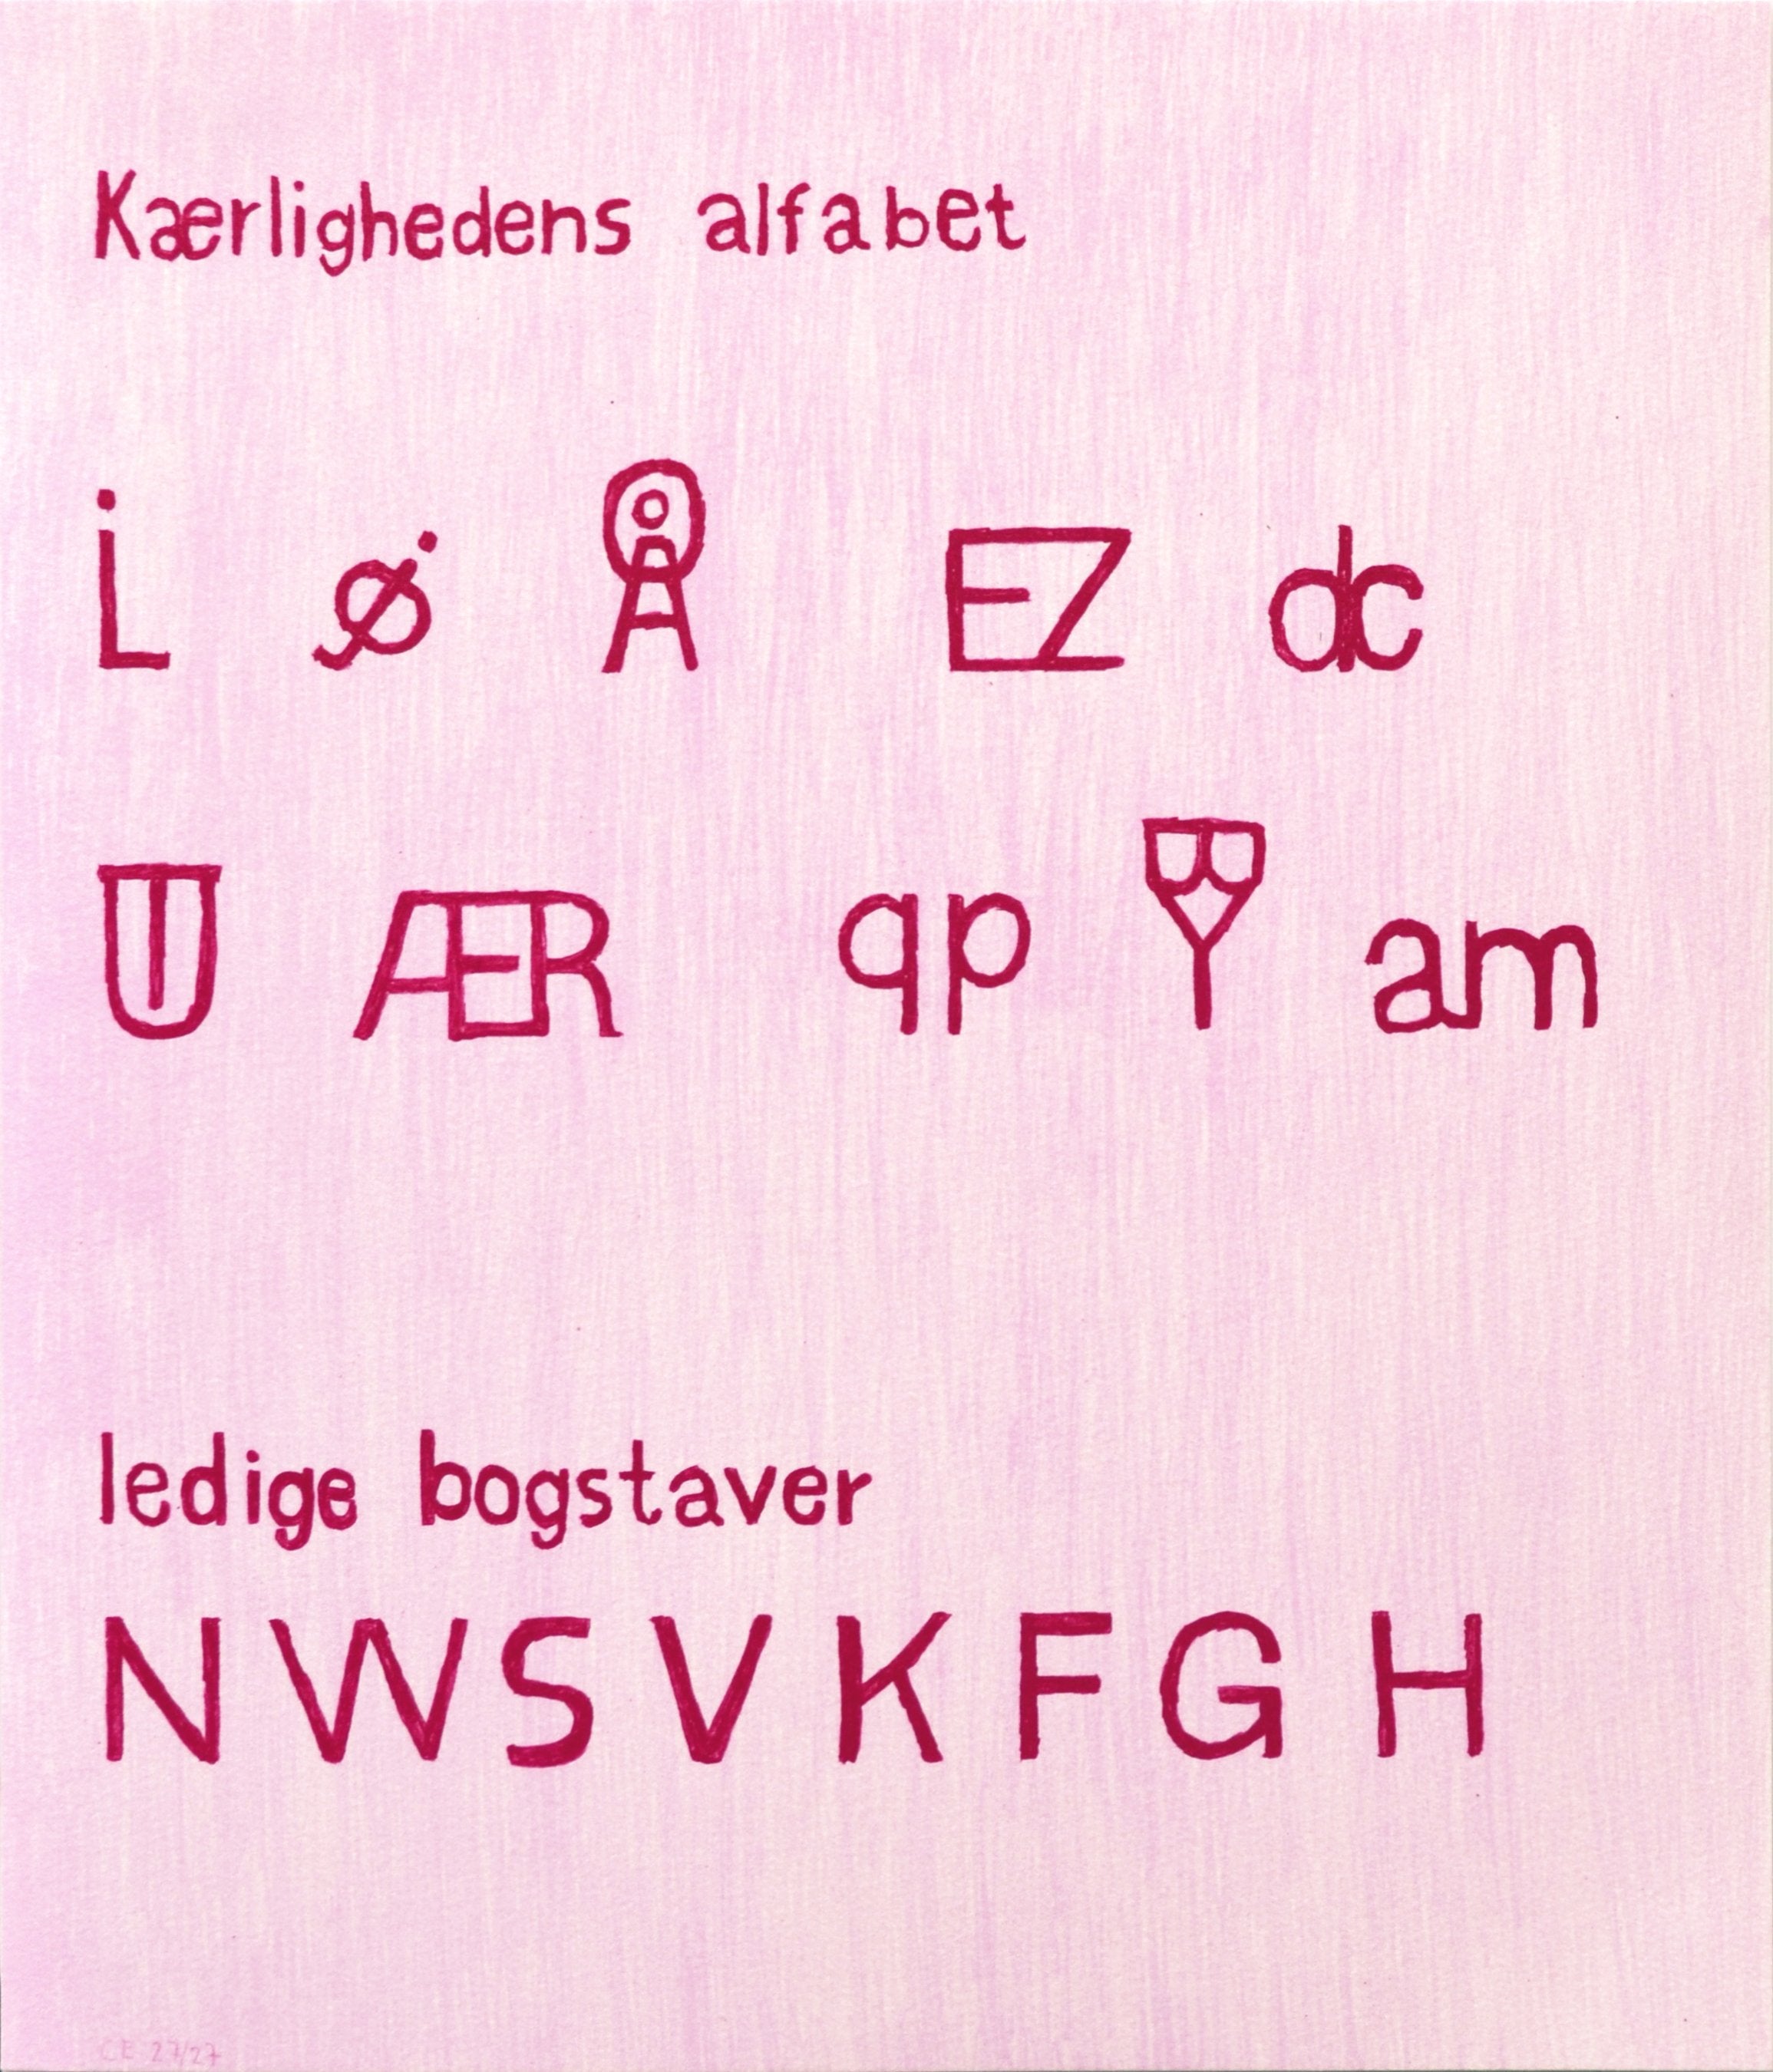 Claus Ejner - "The Alphabet of Love"